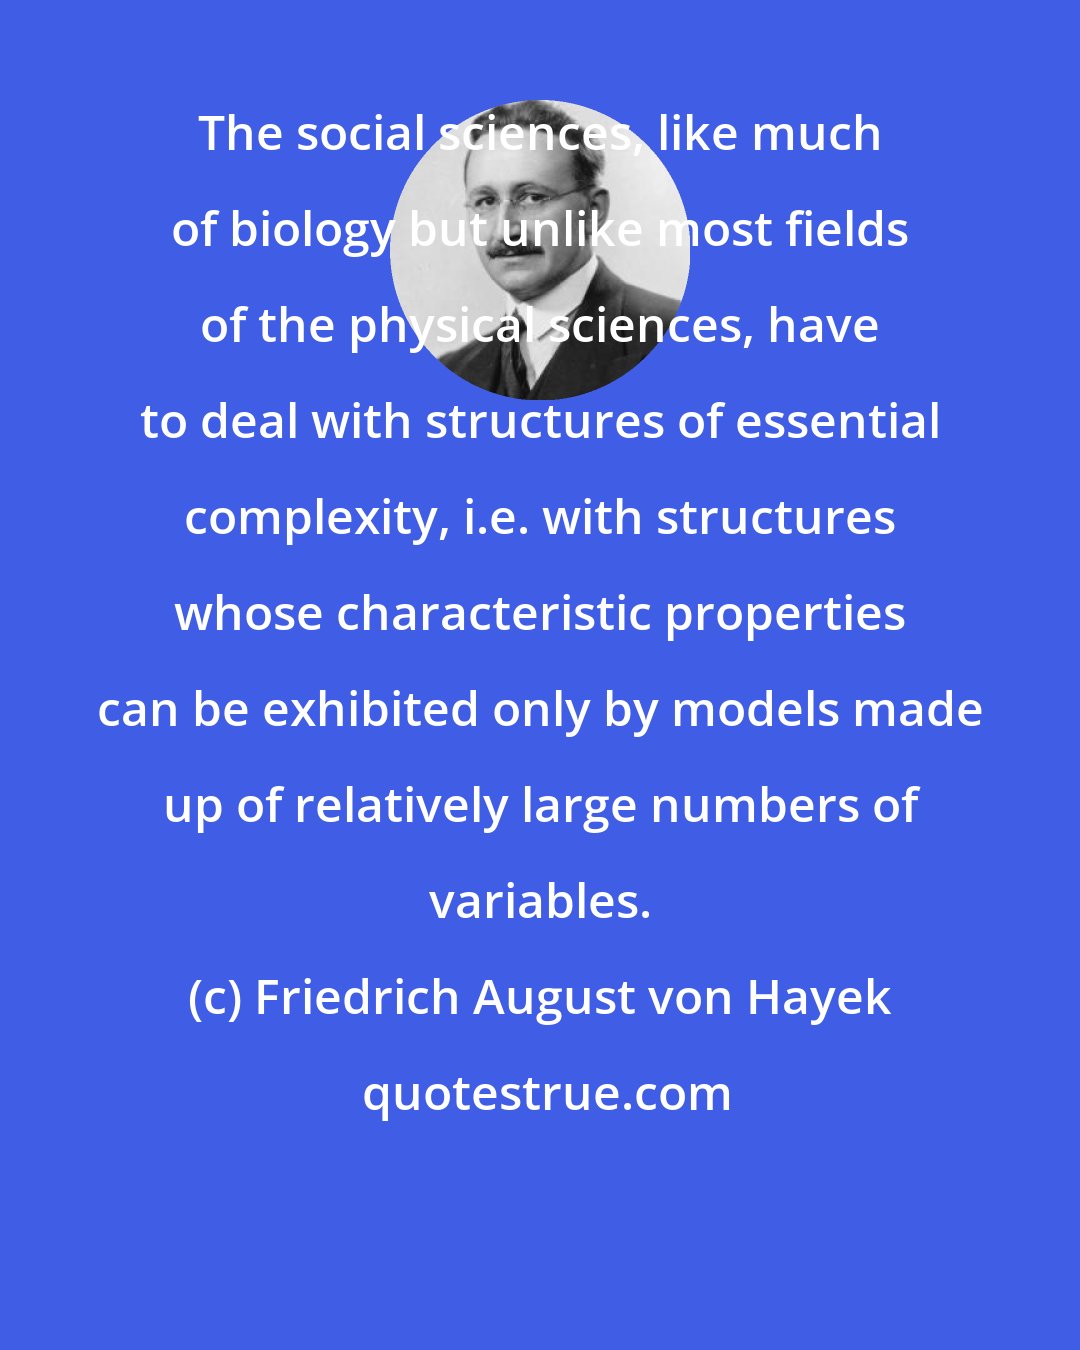 Friedrich August von Hayek: The social sciences, like much of biology but unlike most fields of the physical sciences, have to deal with structures of essential complexity, i.e. with structures whose characteristic properties can be exhibited only by models made up of relatively large numbers of variables.